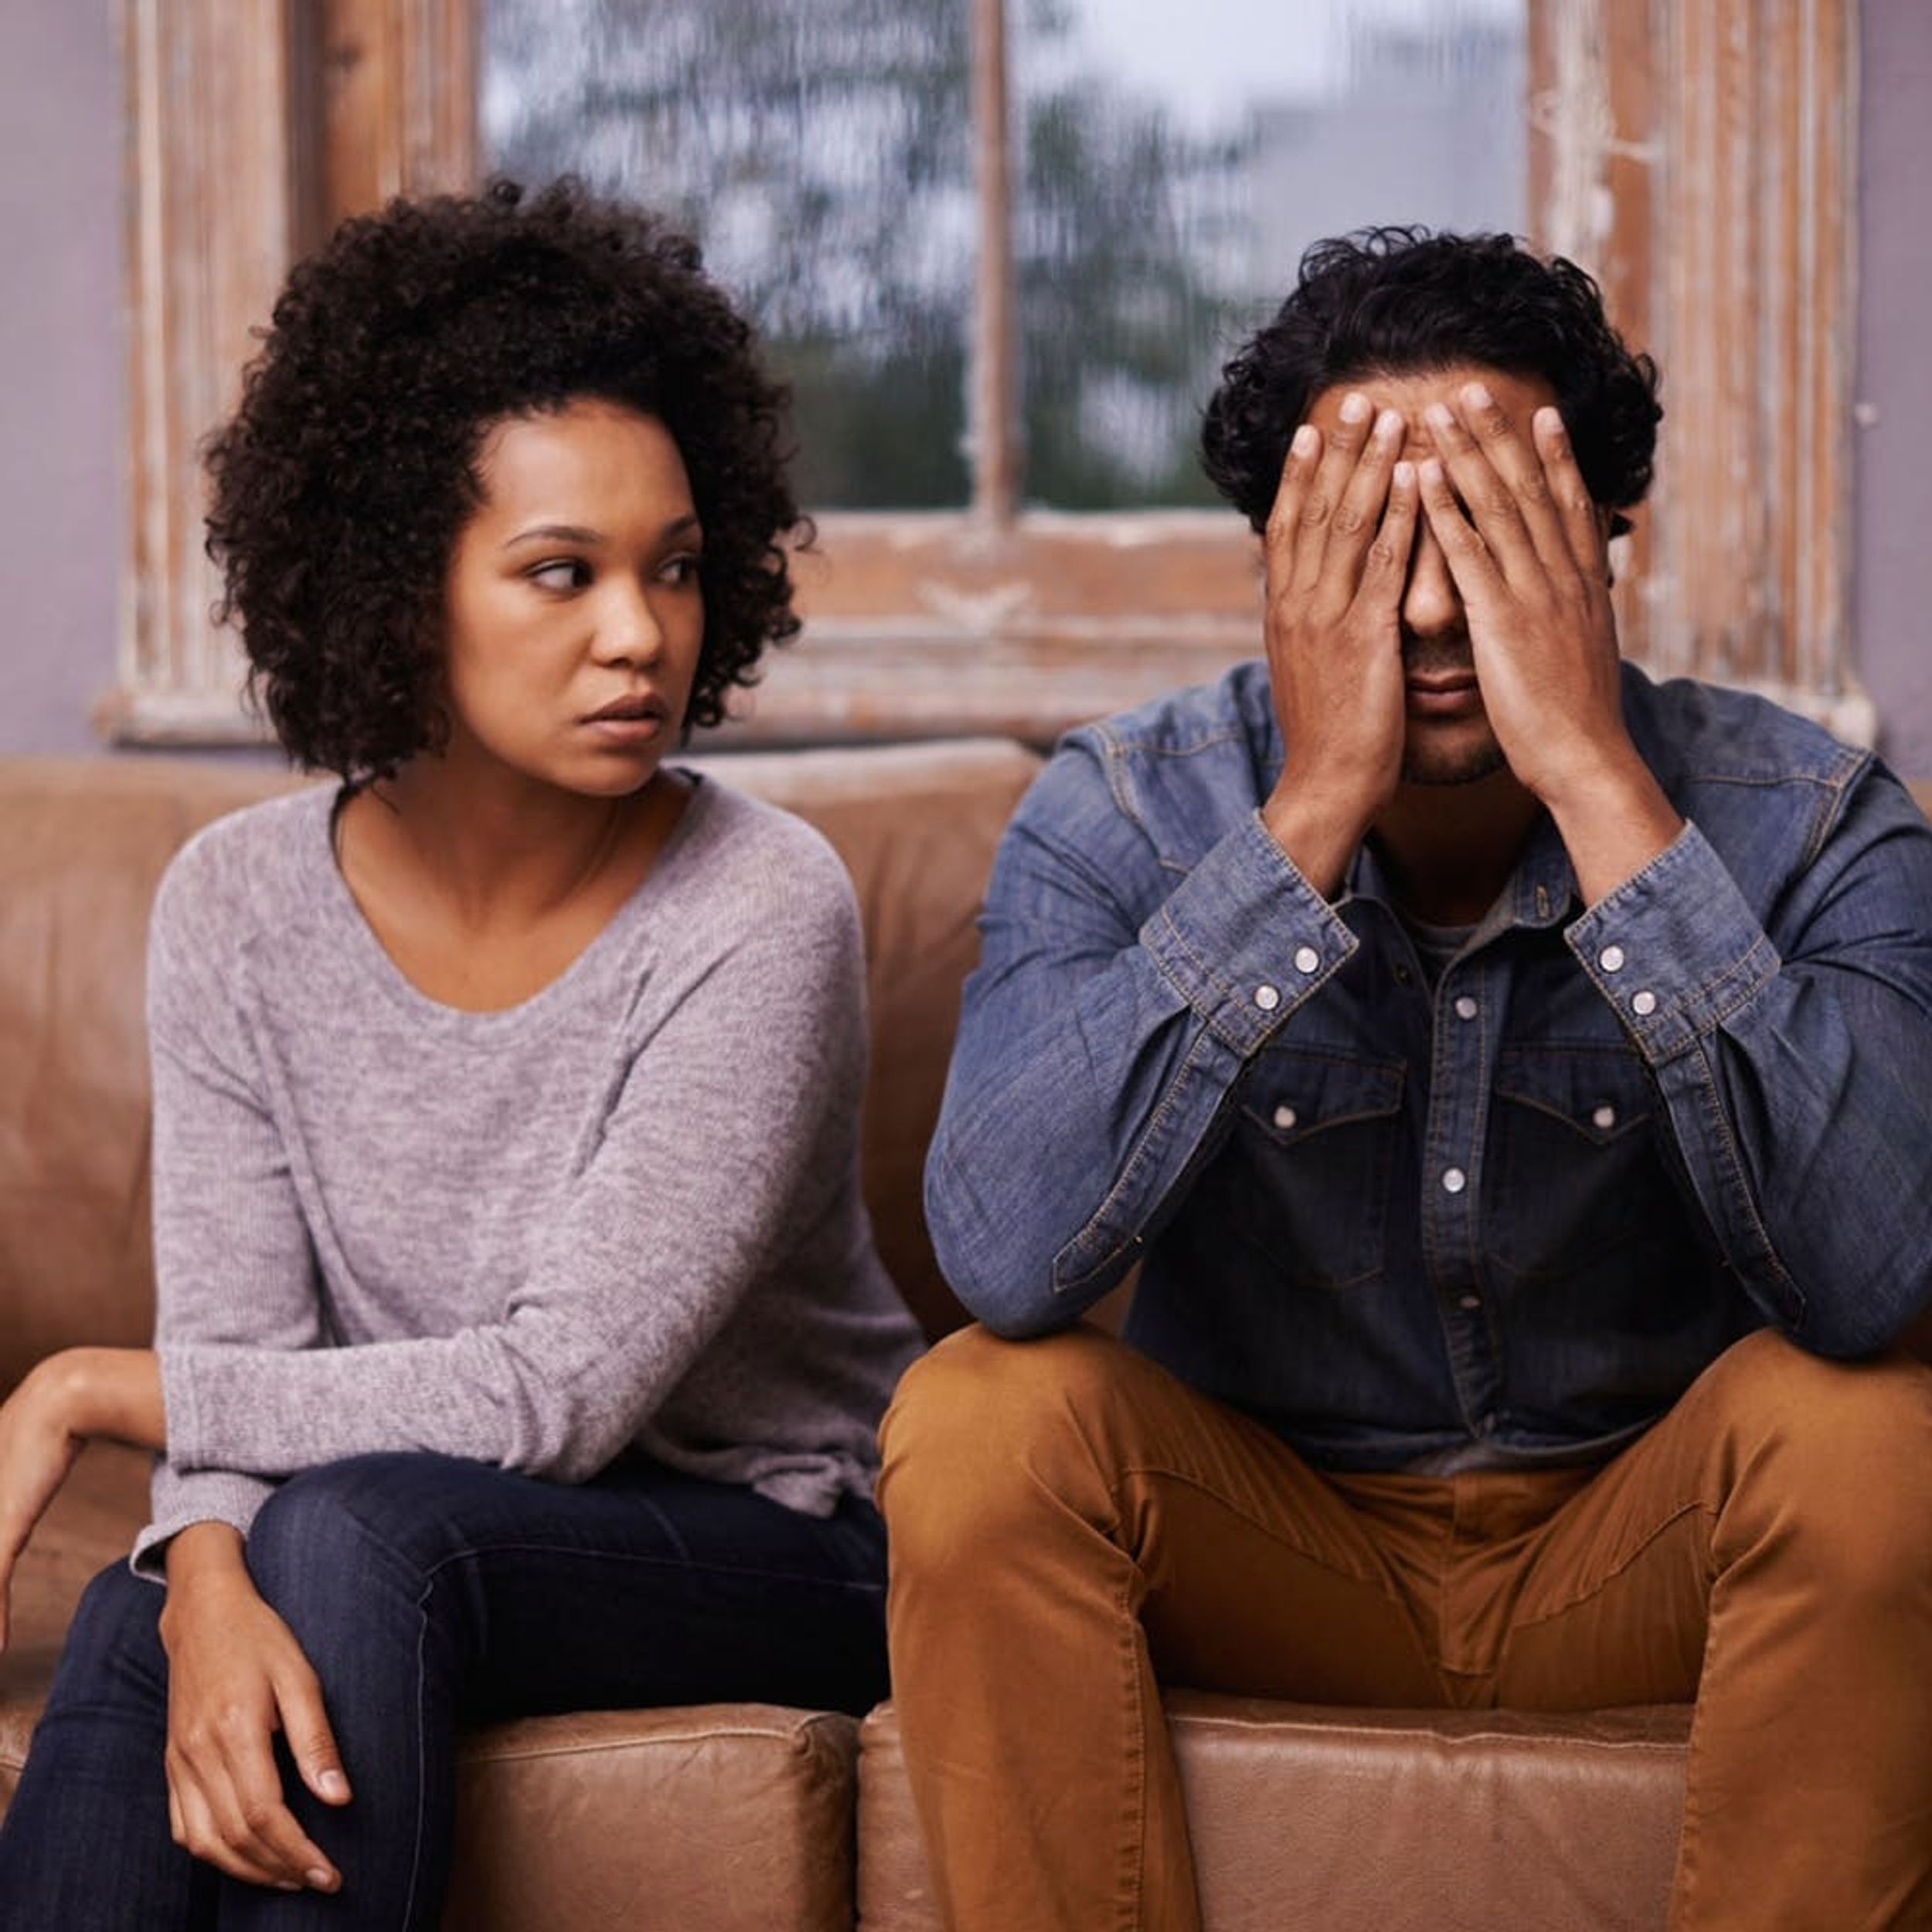 3 Signs You’re in a Toxic Relationship + How to Get Out